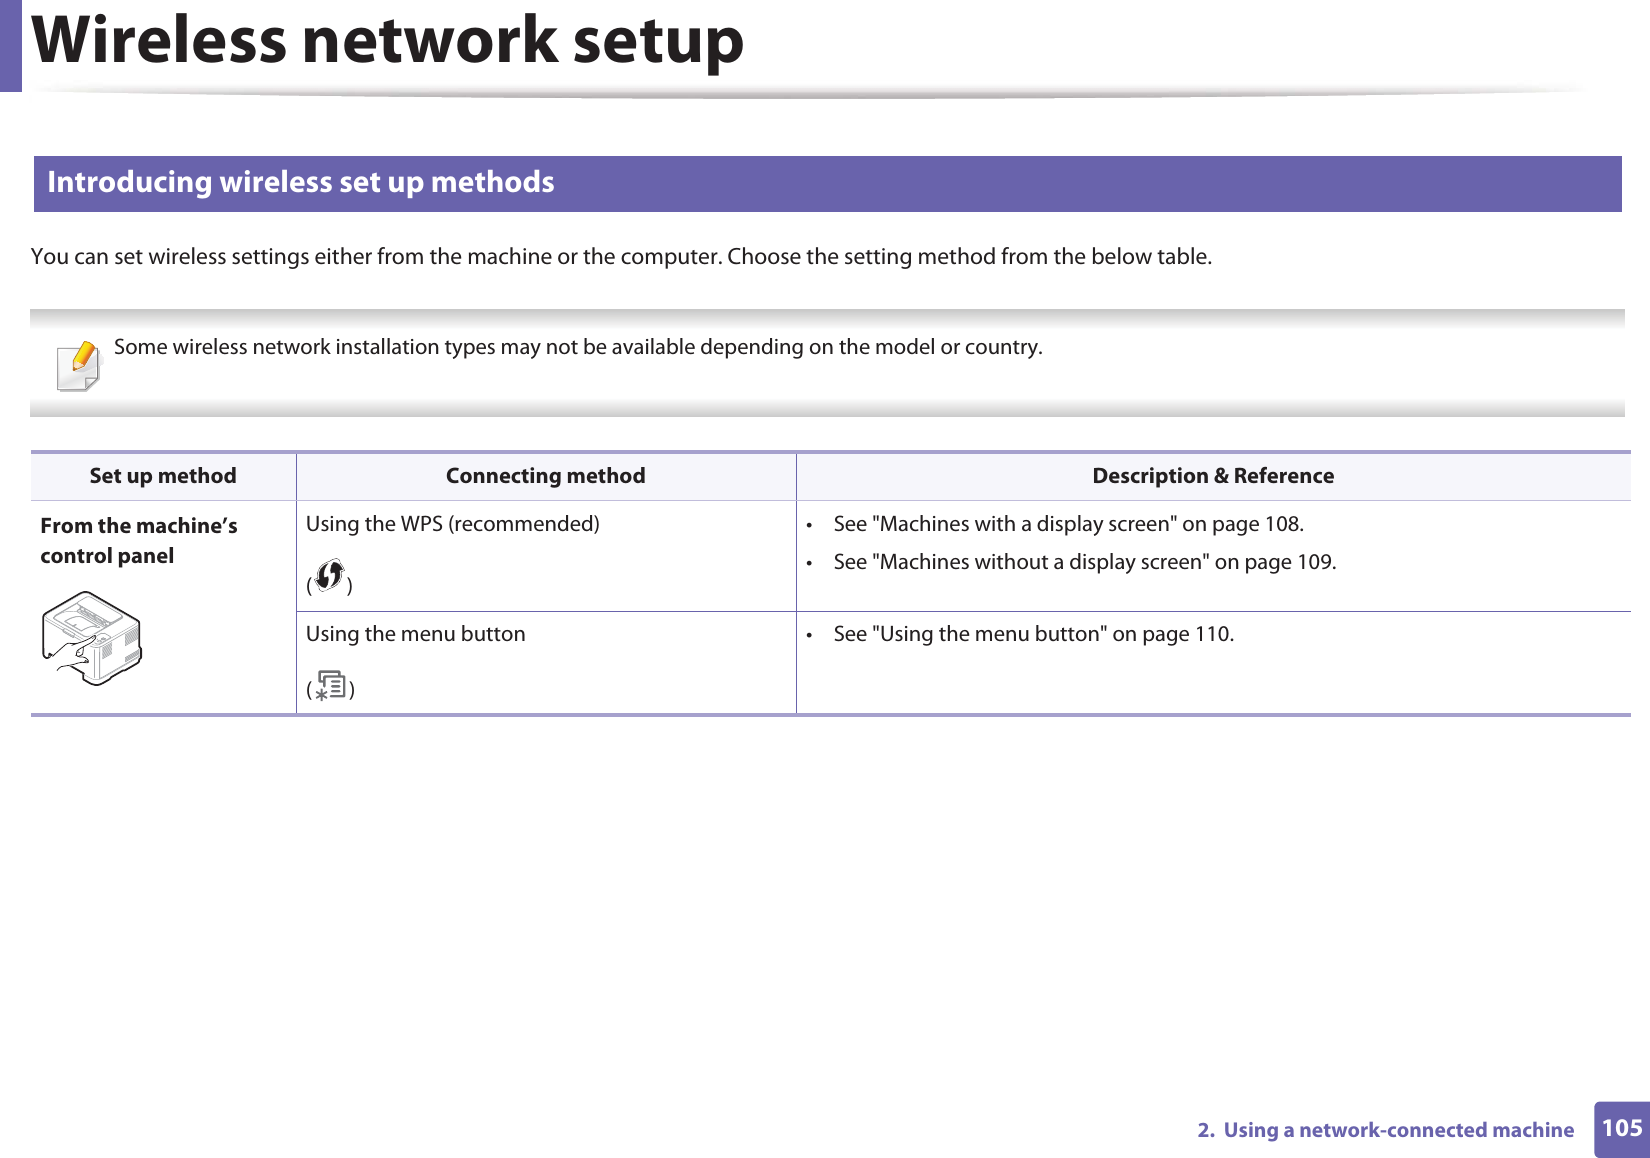 Wireless network setup1052.  Using a network-connected machine13 Introducing wireless set up methodsYou can set wireless settings either from the machine or the computer. Choose the setting method from the below table. Some wireless network installation types may not be available depending on the model or country.  Set up method Connecting method Description &amp; ReferenceFrom the machine’s control panelUsing the WPS (recommended)()• See &quot;Machines with a display screen&quot; on page 108.• See &quot;Machines without a display screen&quot; on page 109.Using the menu button()• See &quot;Using the menu button&quot; on page 110.